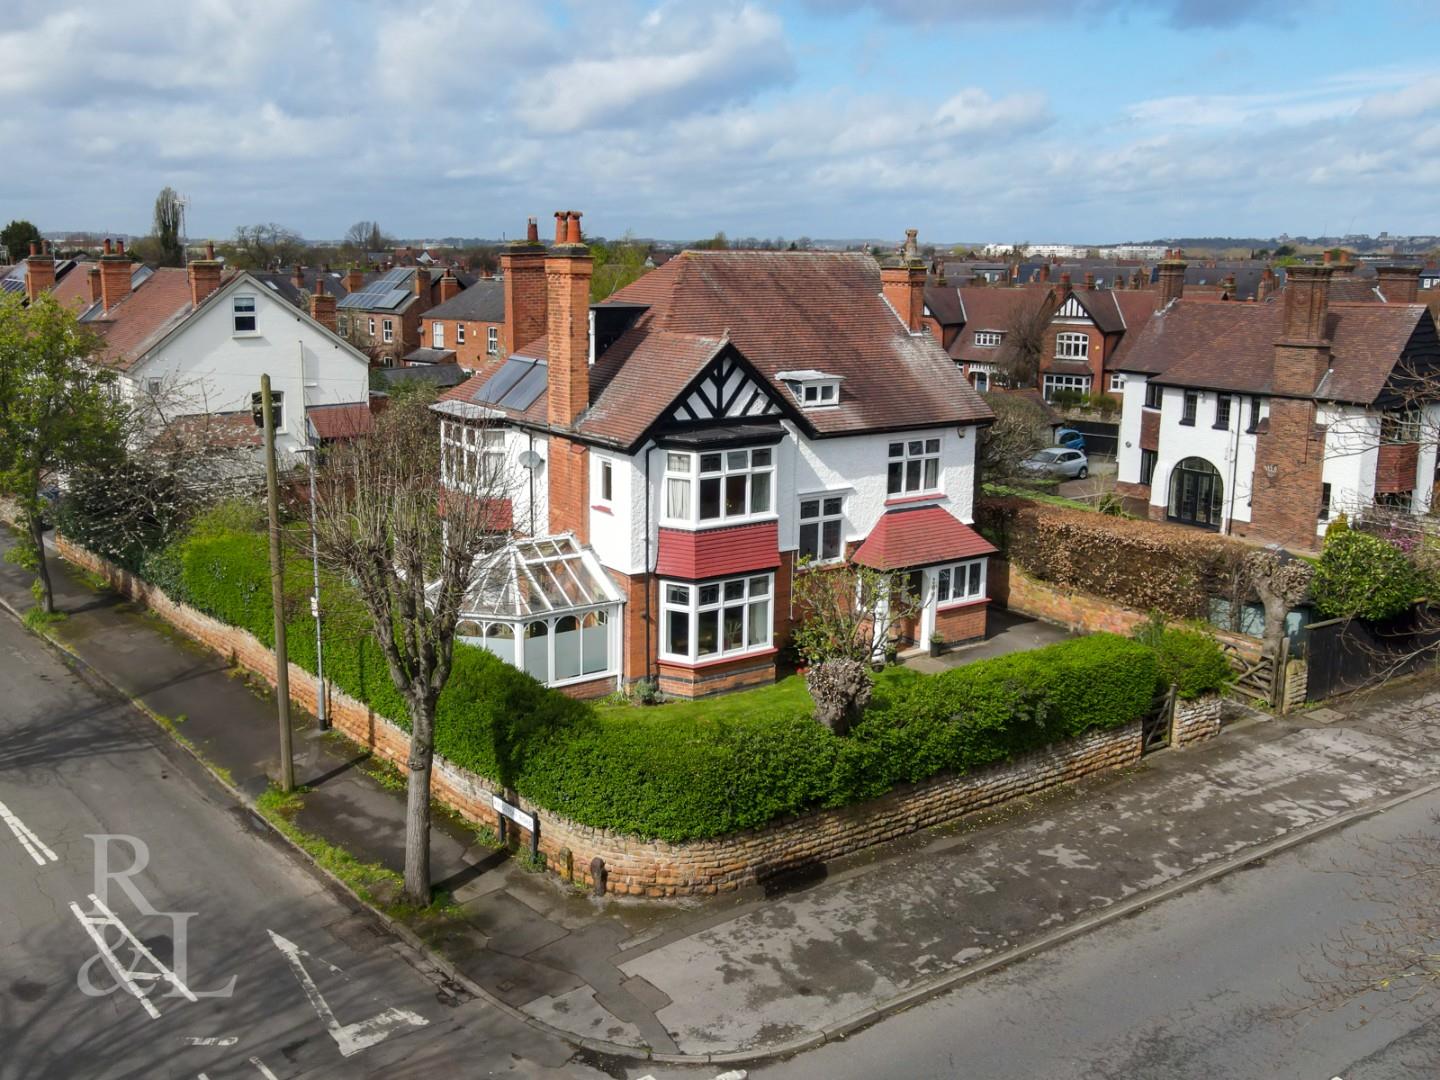 Property image for Musters Road, West Bridgford, Nottingham